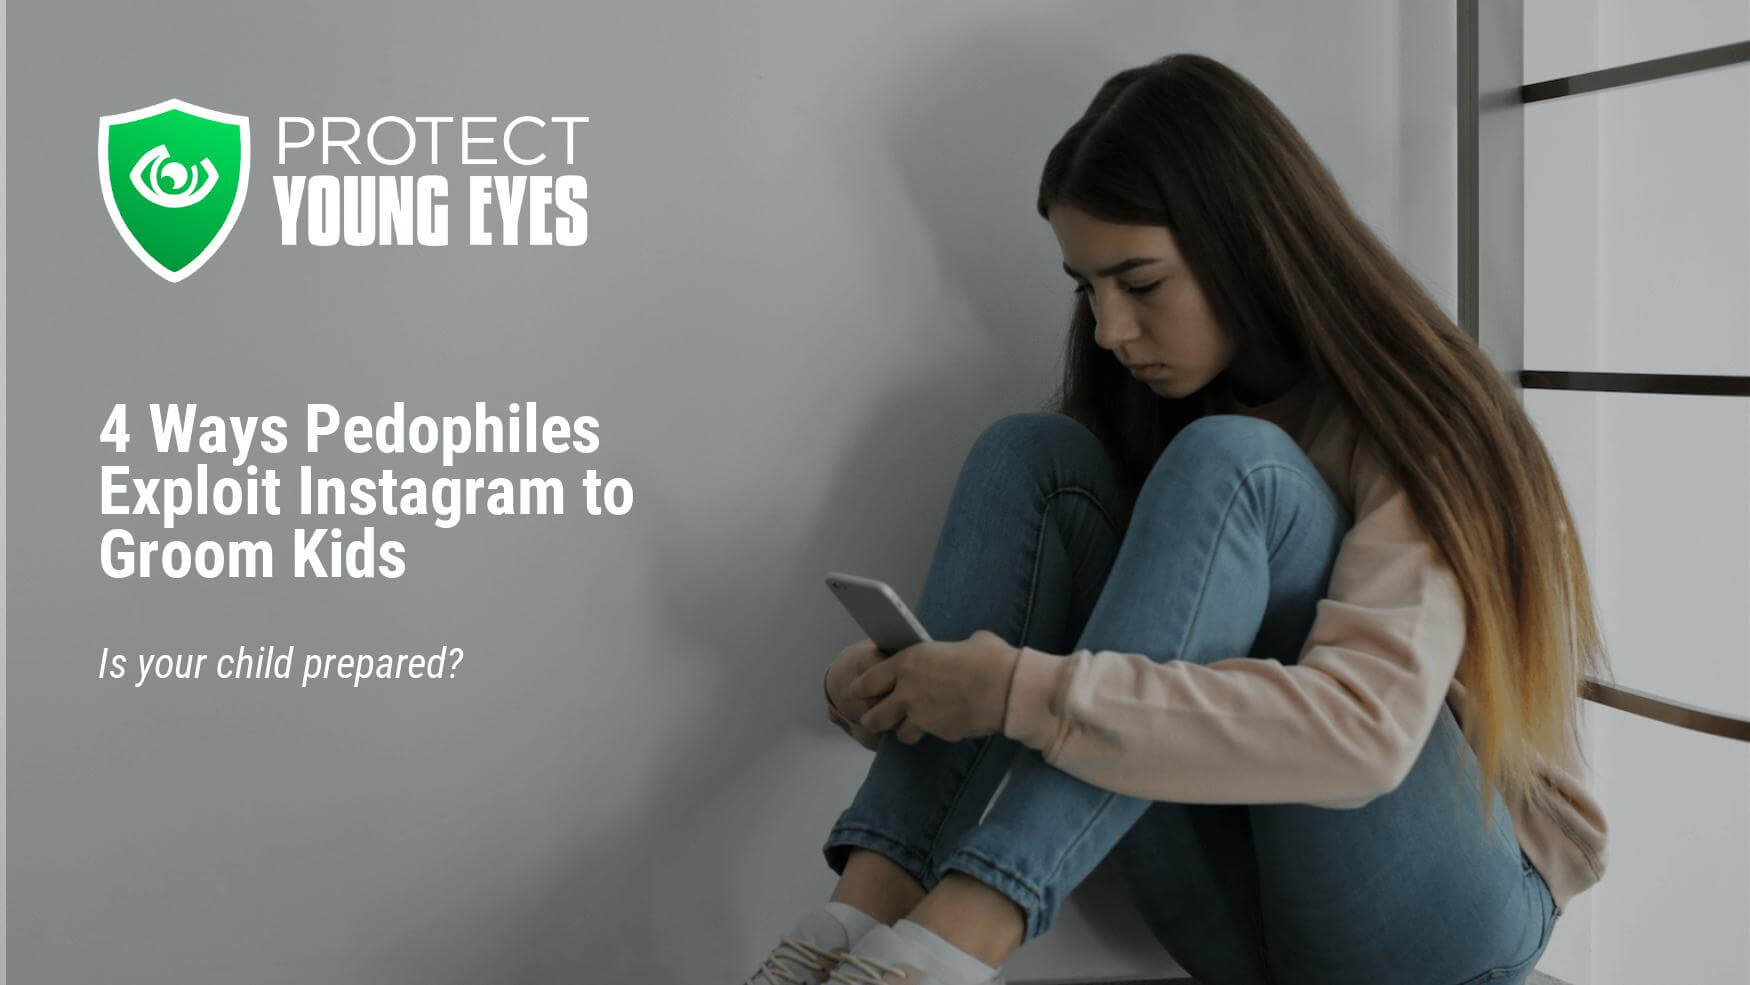 Kide Porn Tube - 4 Ways Pedophiles Exploit Instagram to Groom Kids | Protect Young Eyes